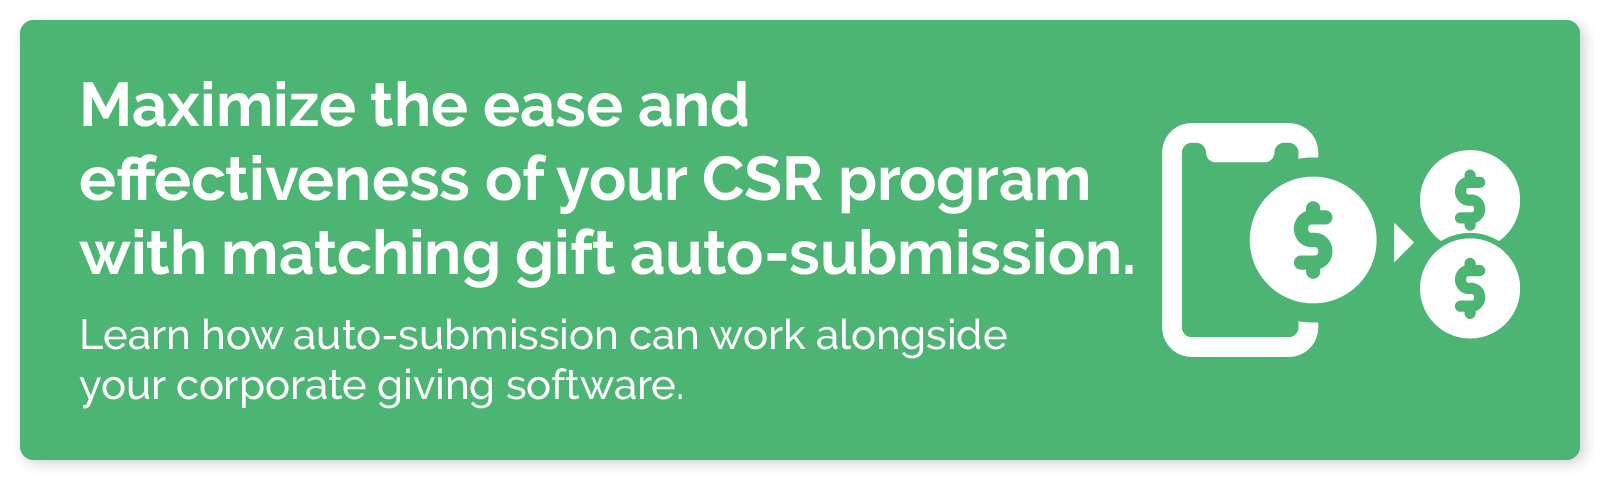 Check if your CSR platform integrates with 360MatchPro to maximize the ease and effectiveness of your program via auto-submission.